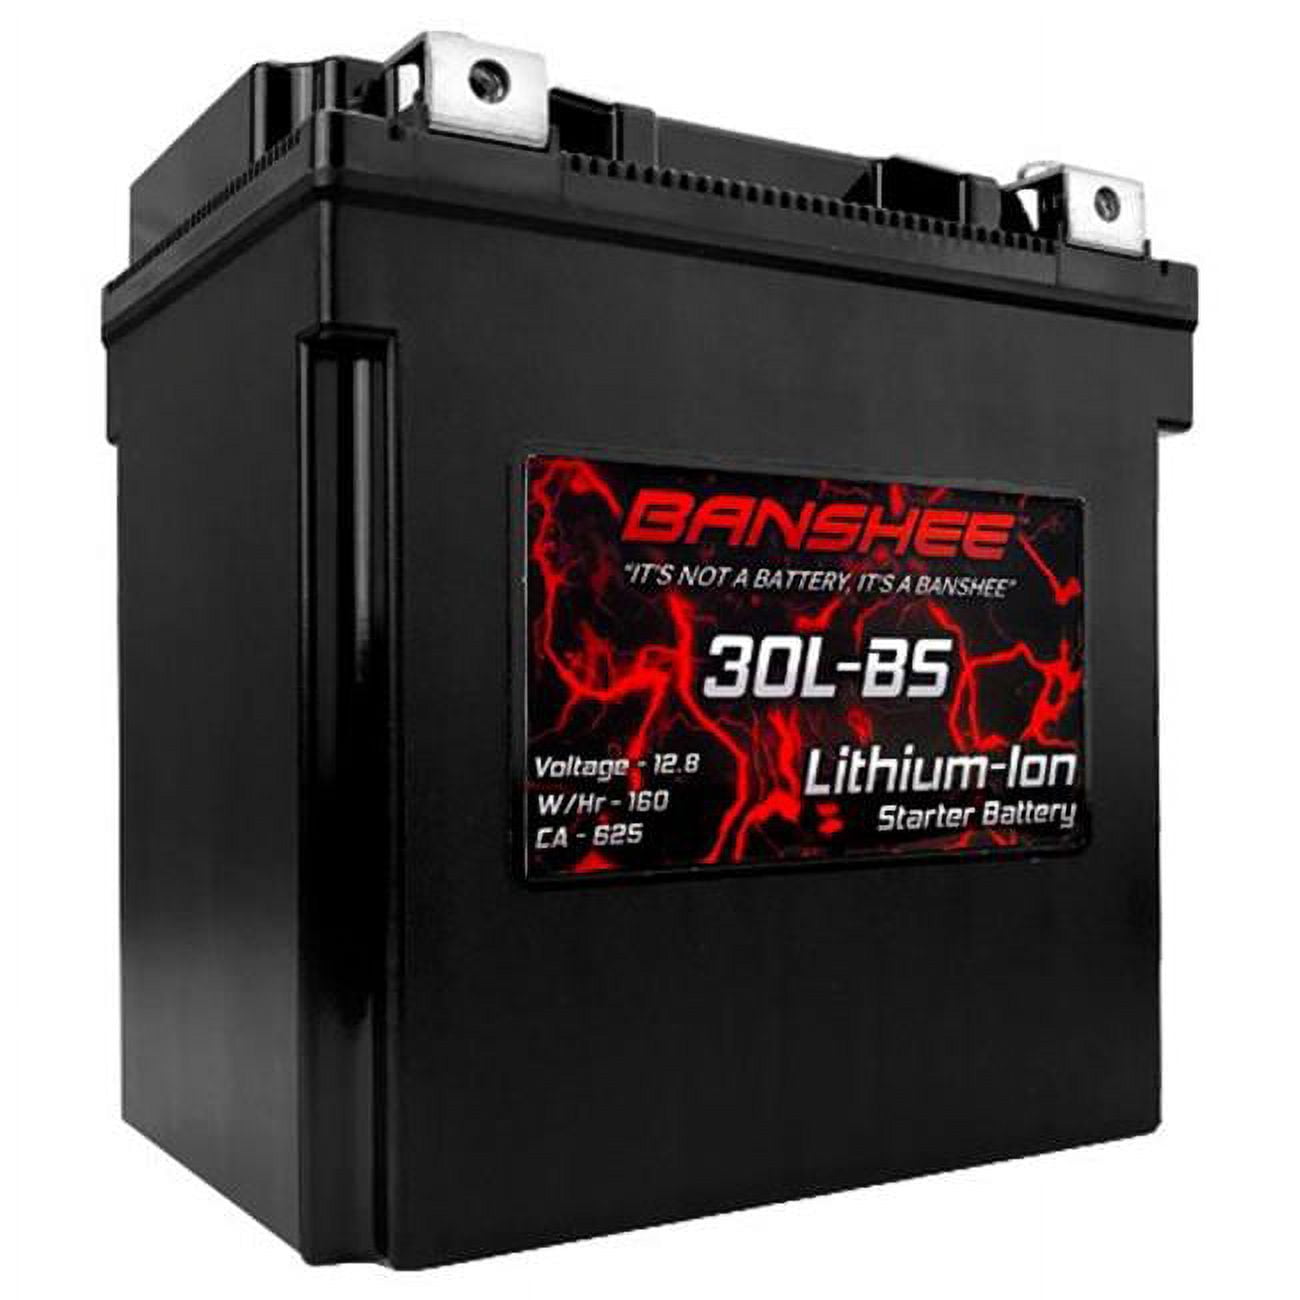 Picture of Banshee DLFP30L-BS-CS2 12.8V Lithium Ion Harley Davidson Motorcycle Battery for Replacement 66010-97A